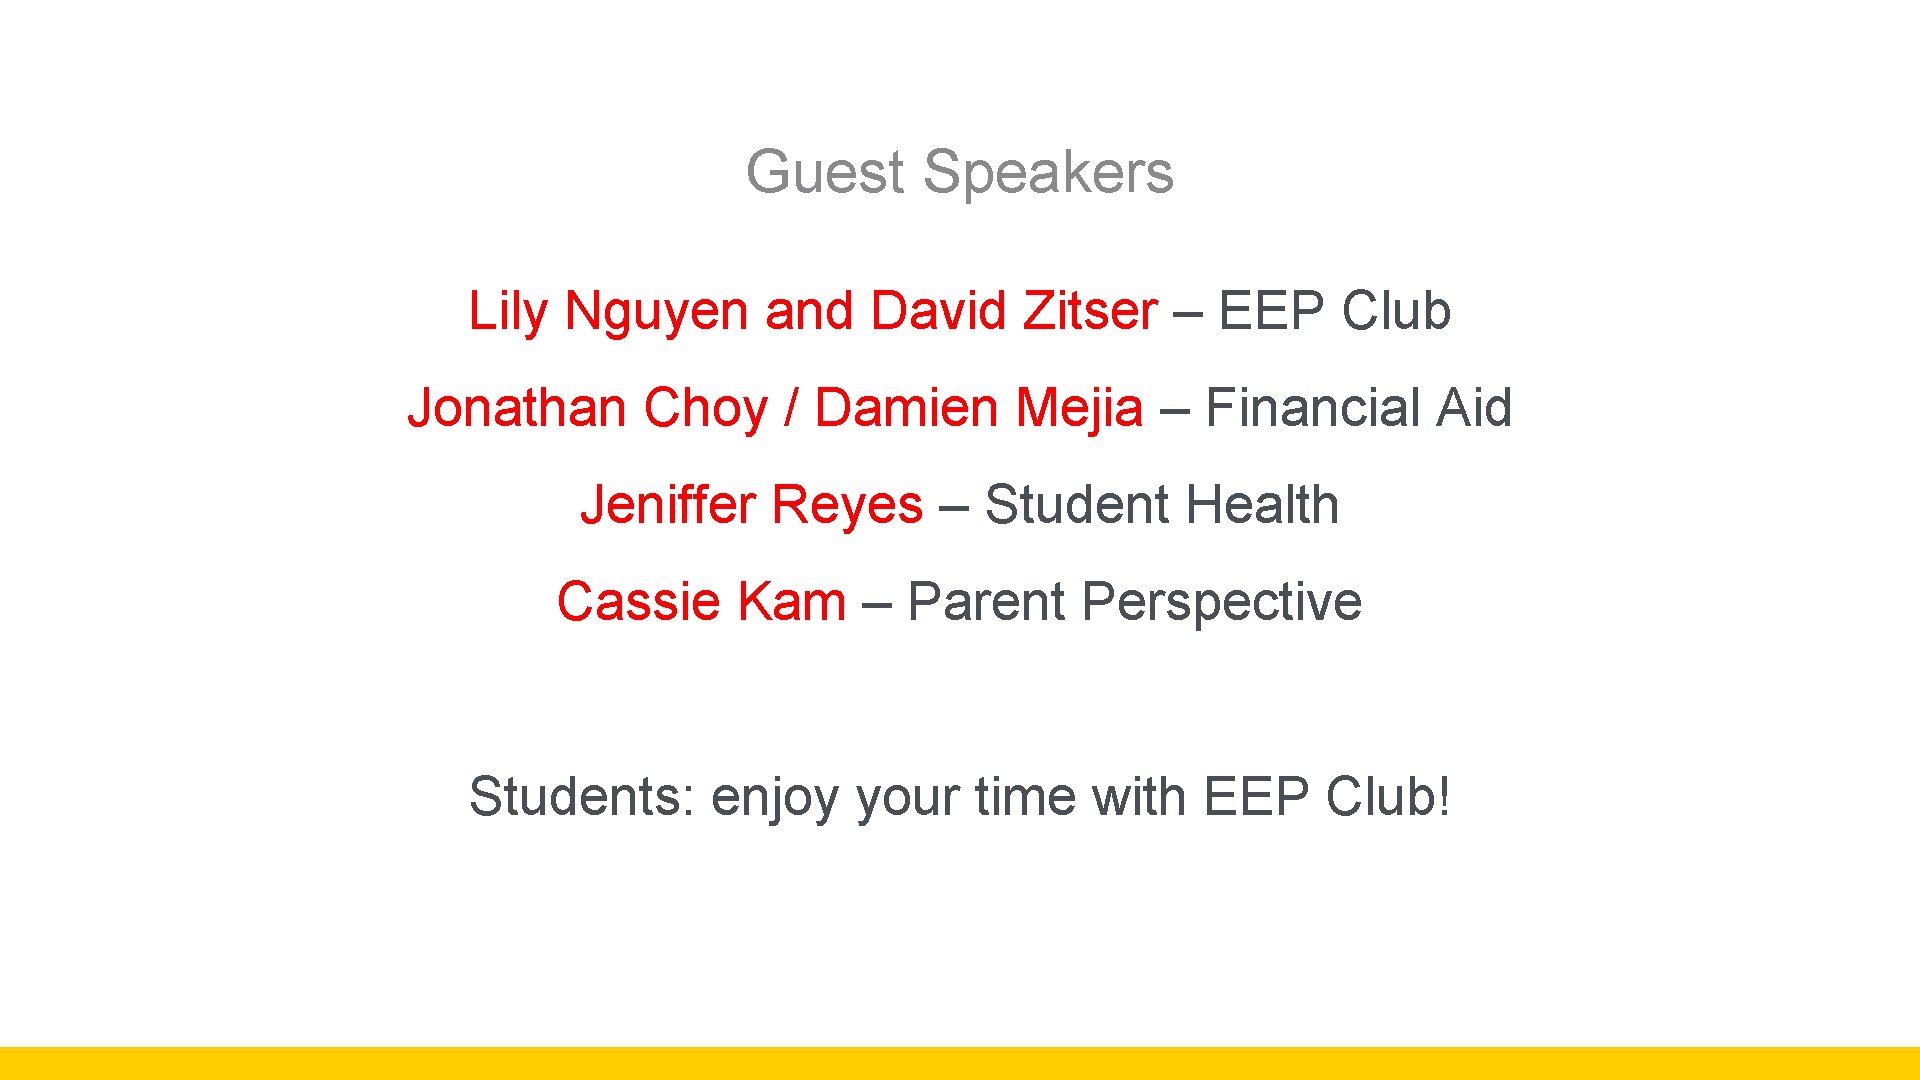 Guest Speakers Lily Nguyen and David Zitser – EEP Club Jonathan Choy / Damien